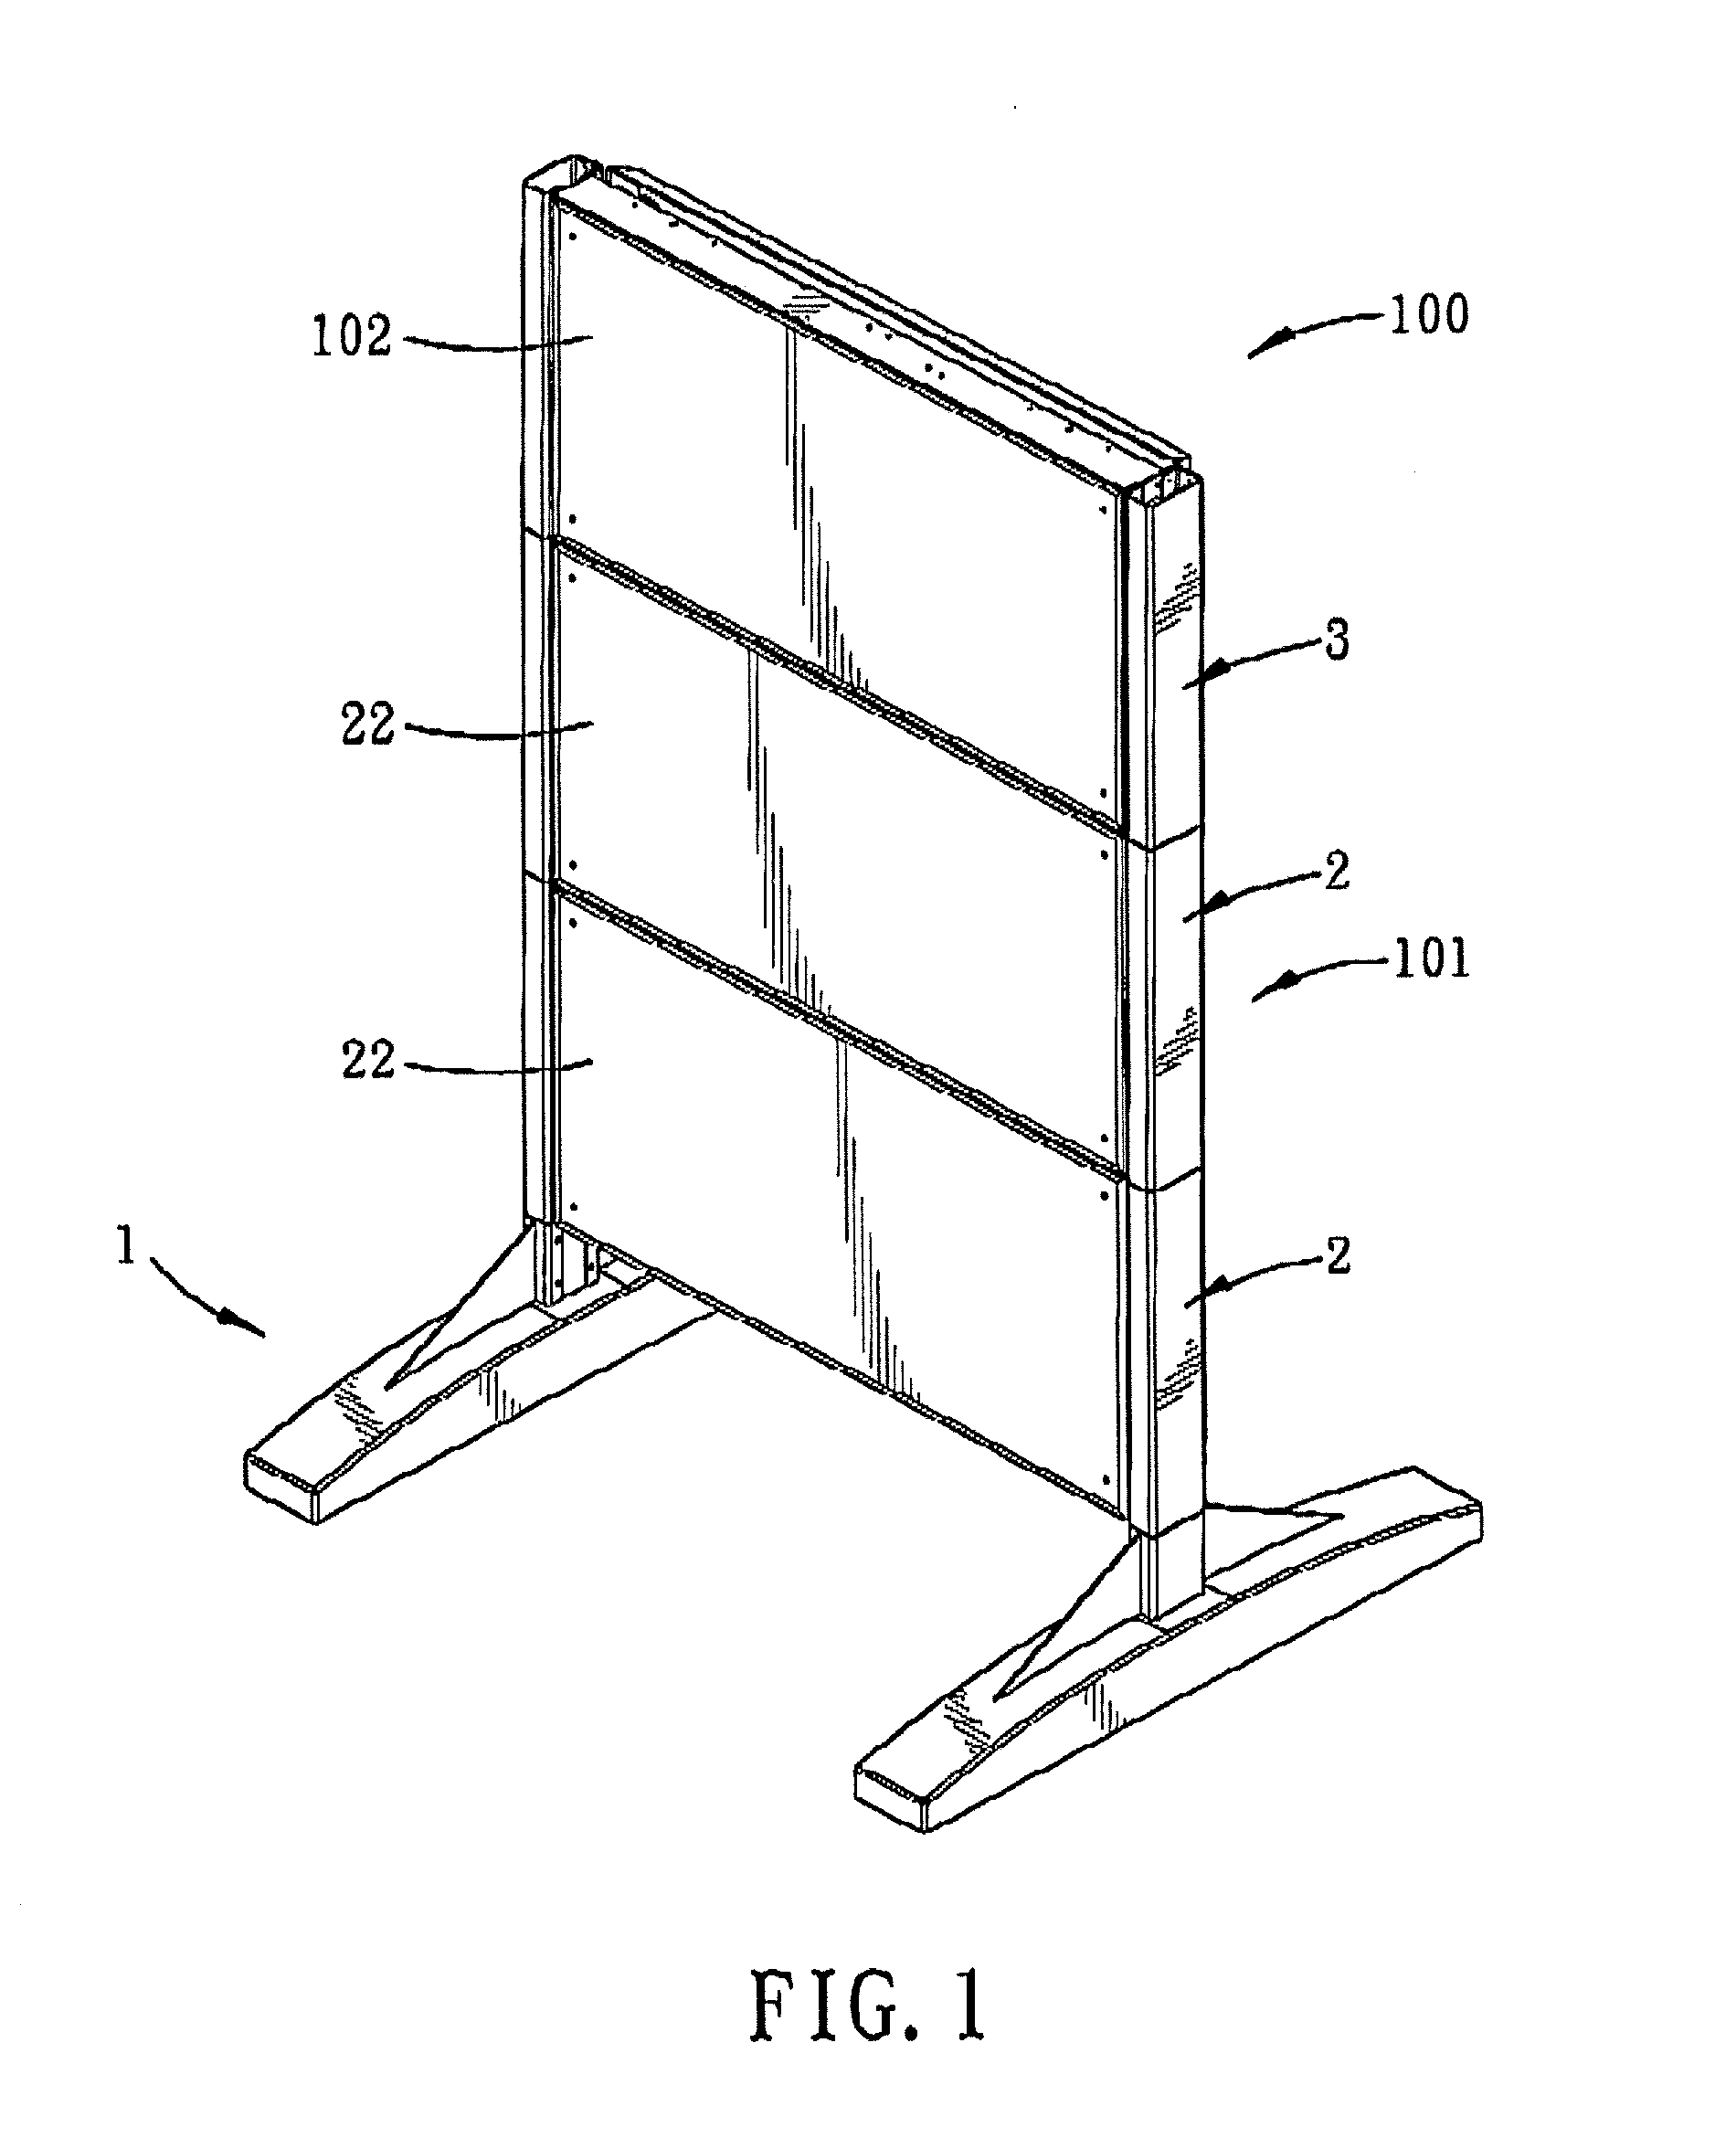 Modular display device having at least one display unit